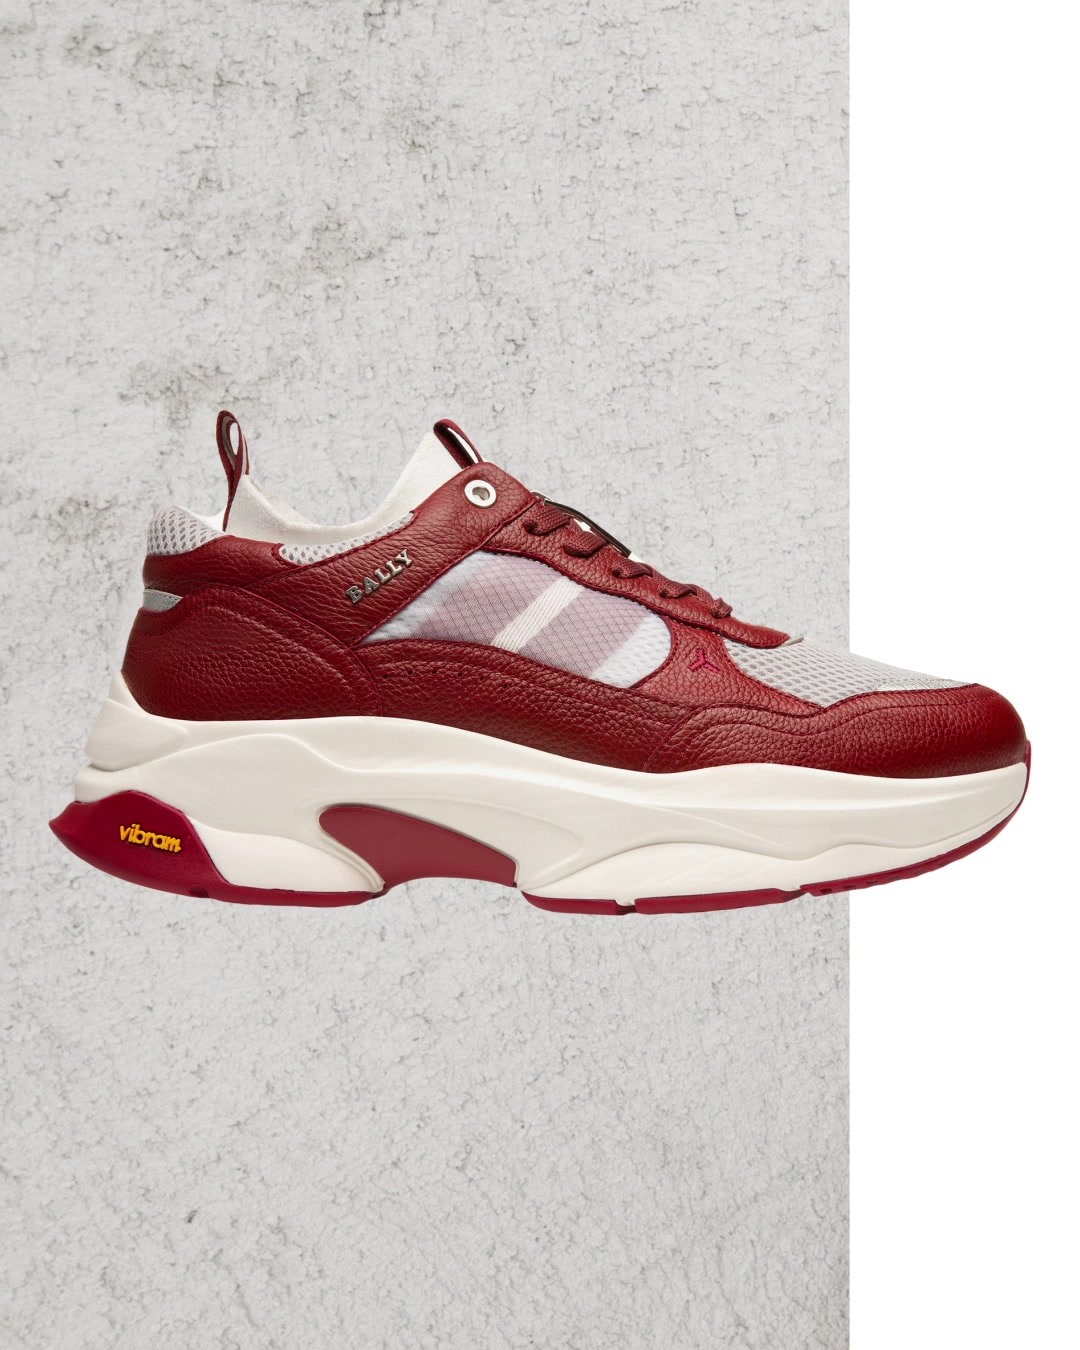 This just in. The Bally Vegas sneakers are now available on Bally.com in new striking color combinations. 